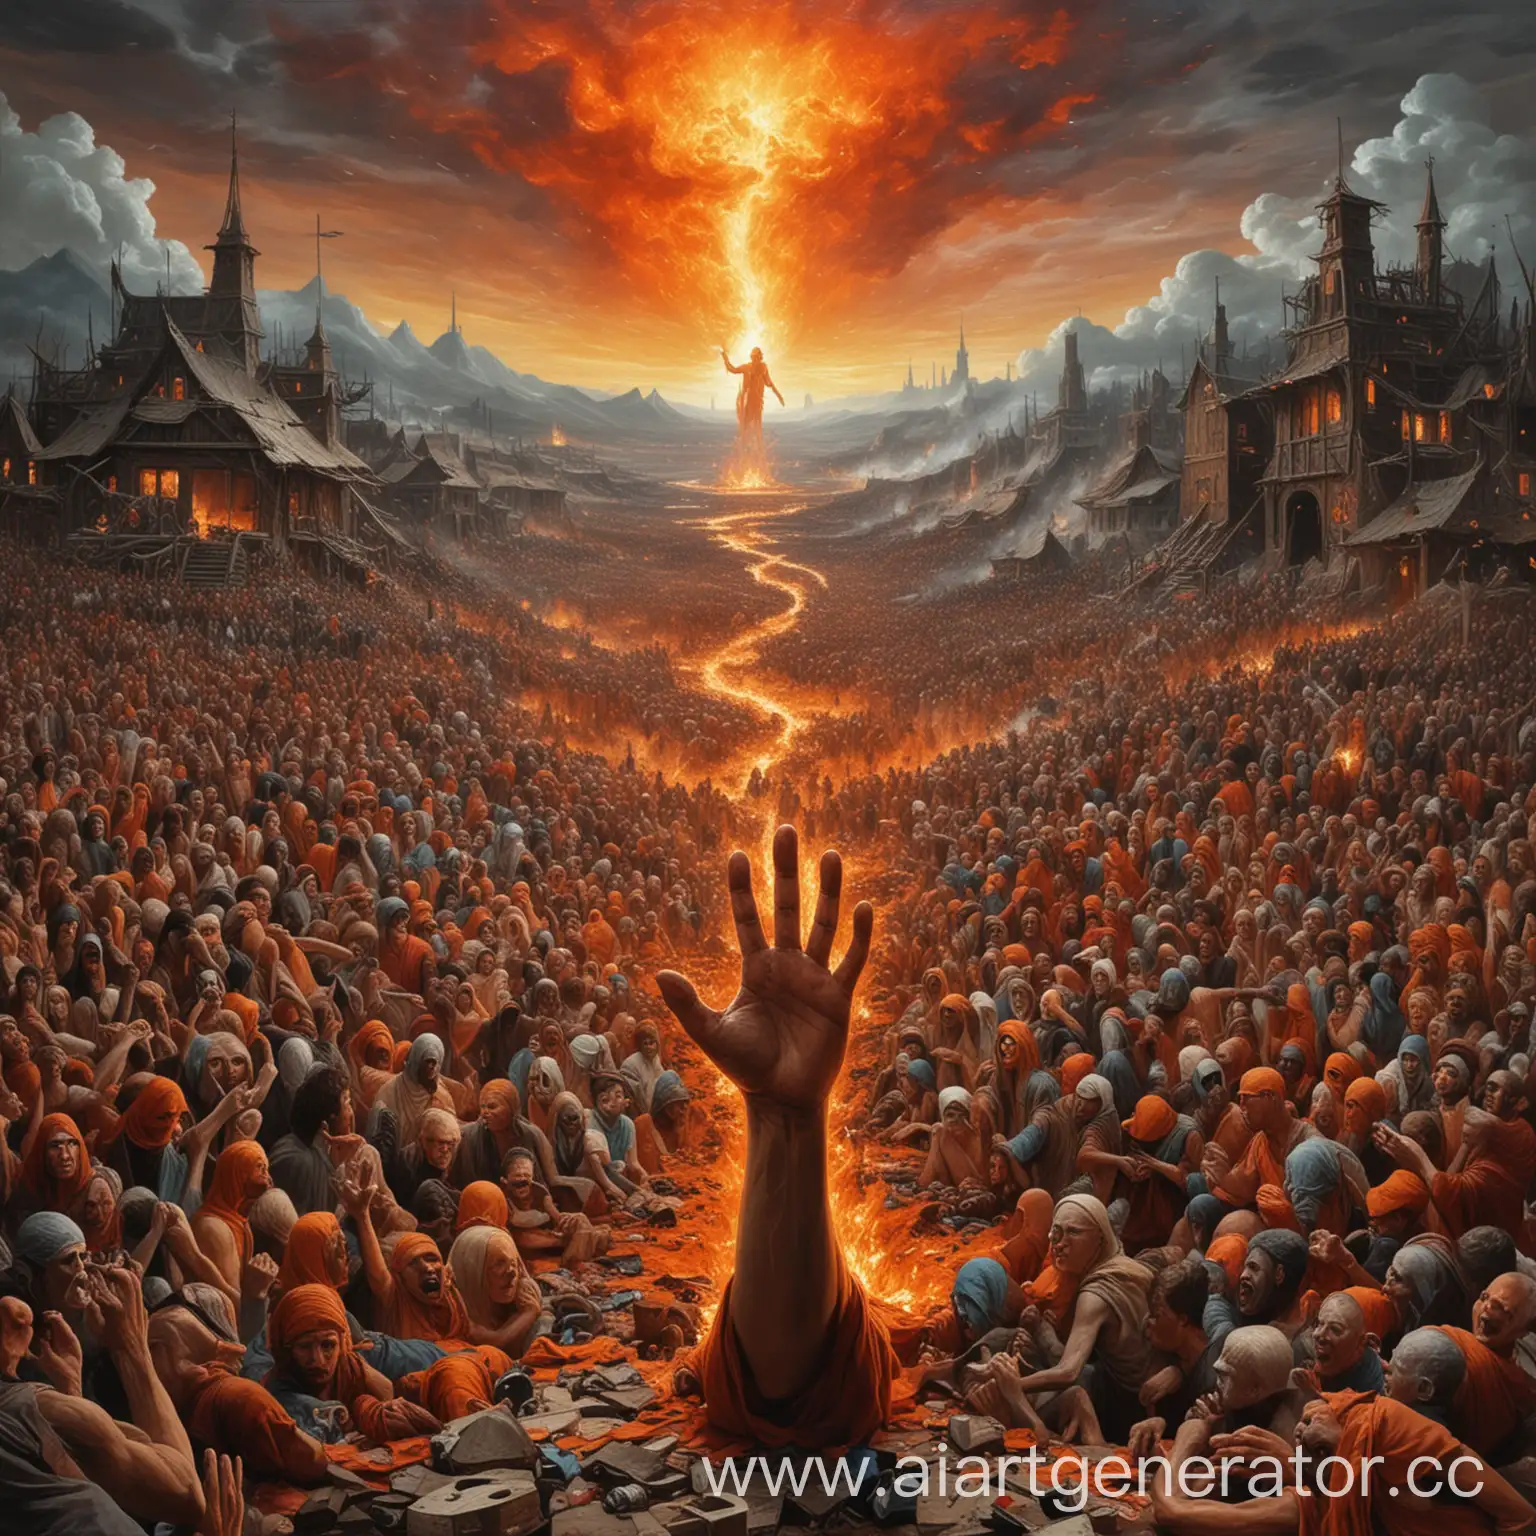 Apocalyptic-Vision-FireCloaked-Figure-with-Enormous-Death-Hand